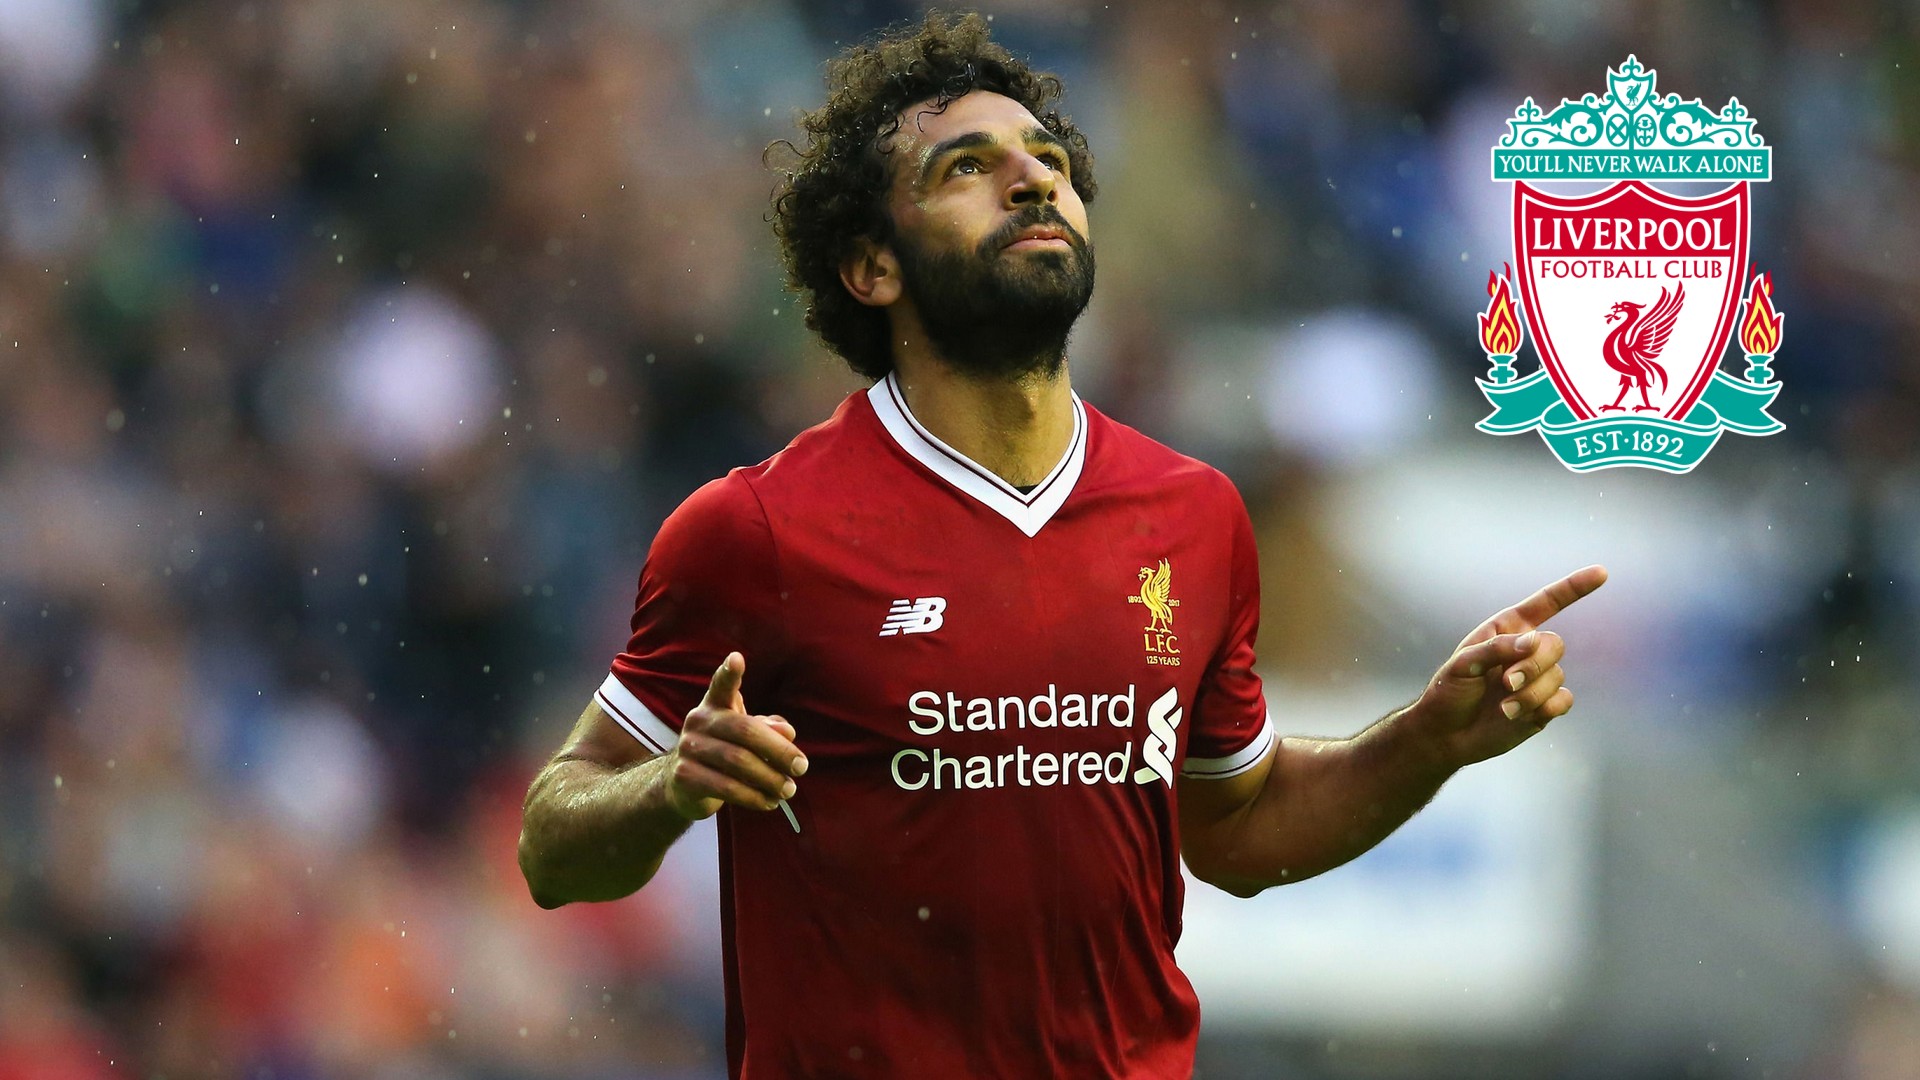 Desktop Wallpaper Liverpool Mohamed Salah with image resolution 1920x1080 pixel. You can use this wallpaper as background for your desktop Computer Screensavers, Android or iPhone smartphones